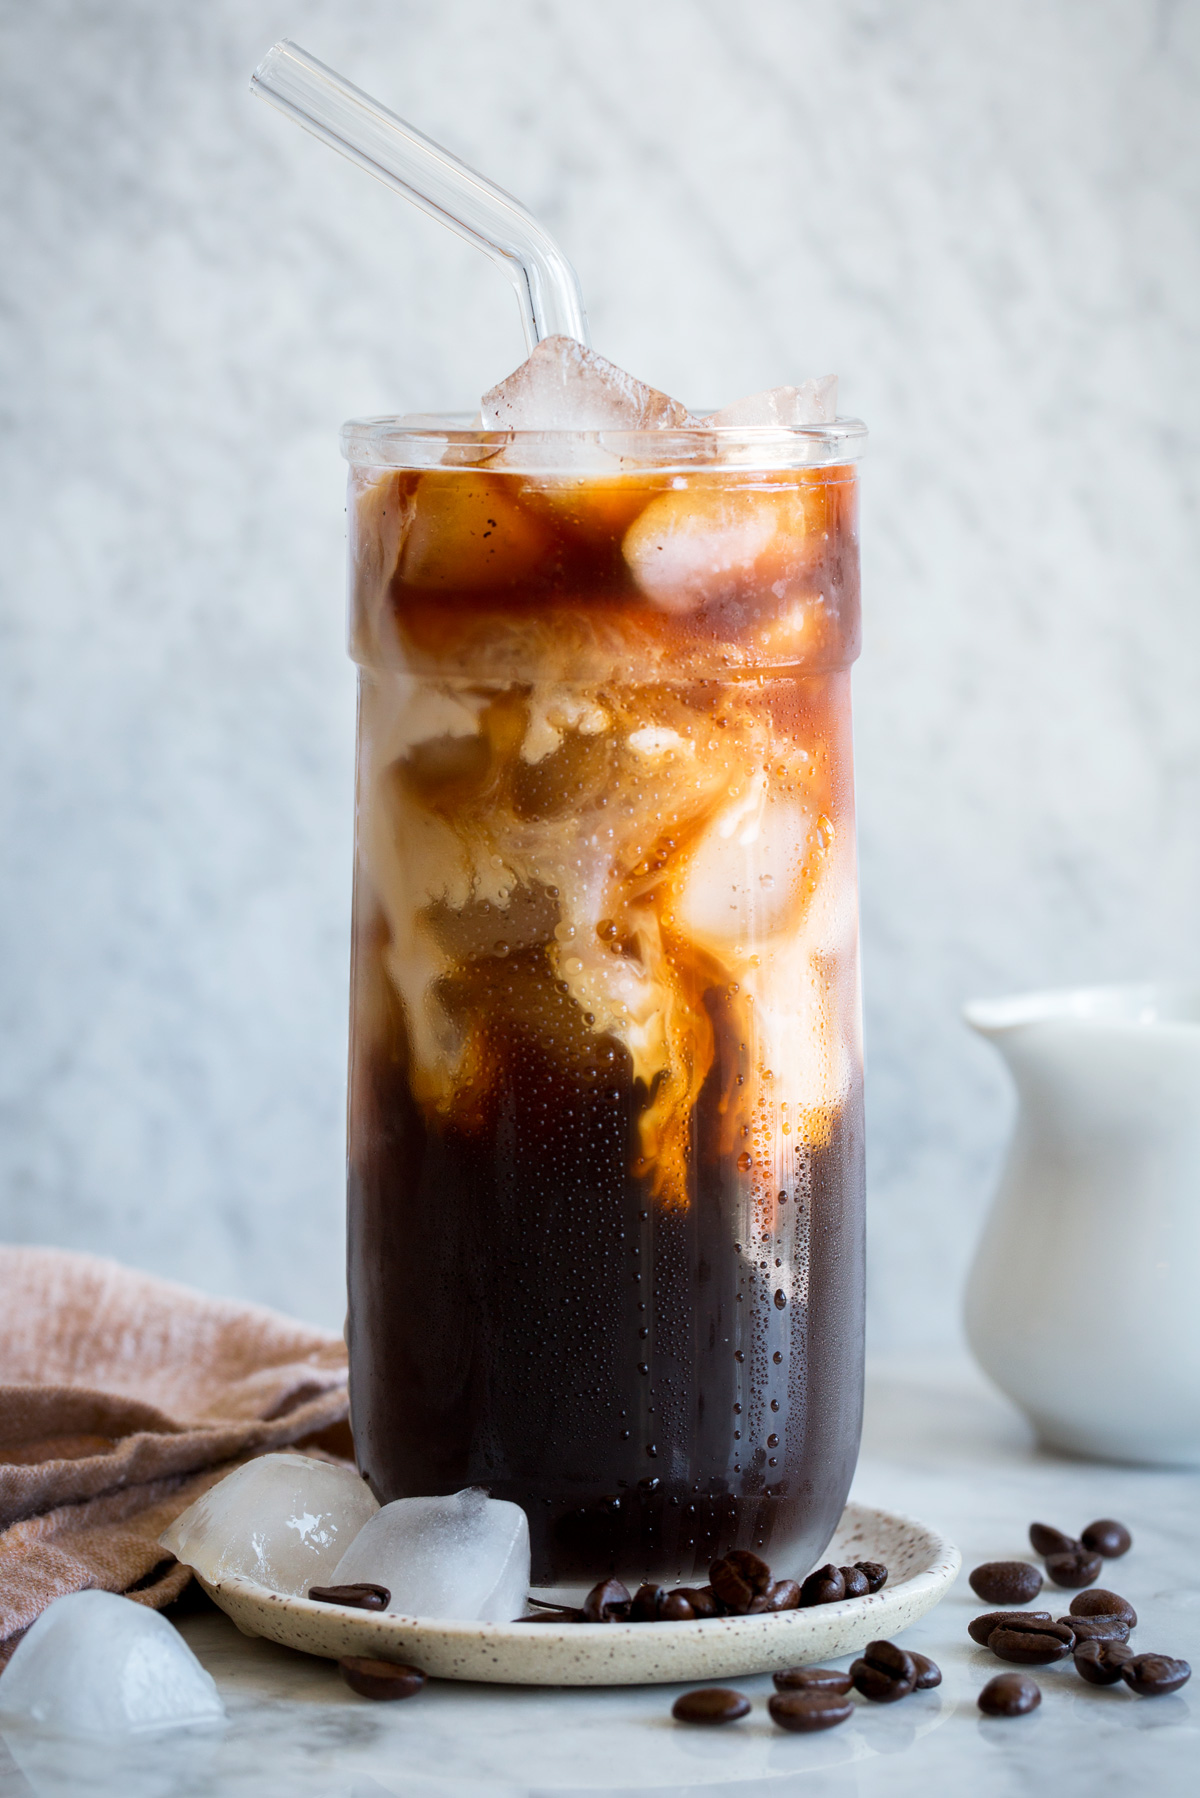 Tall glass of iced coffee with cream.